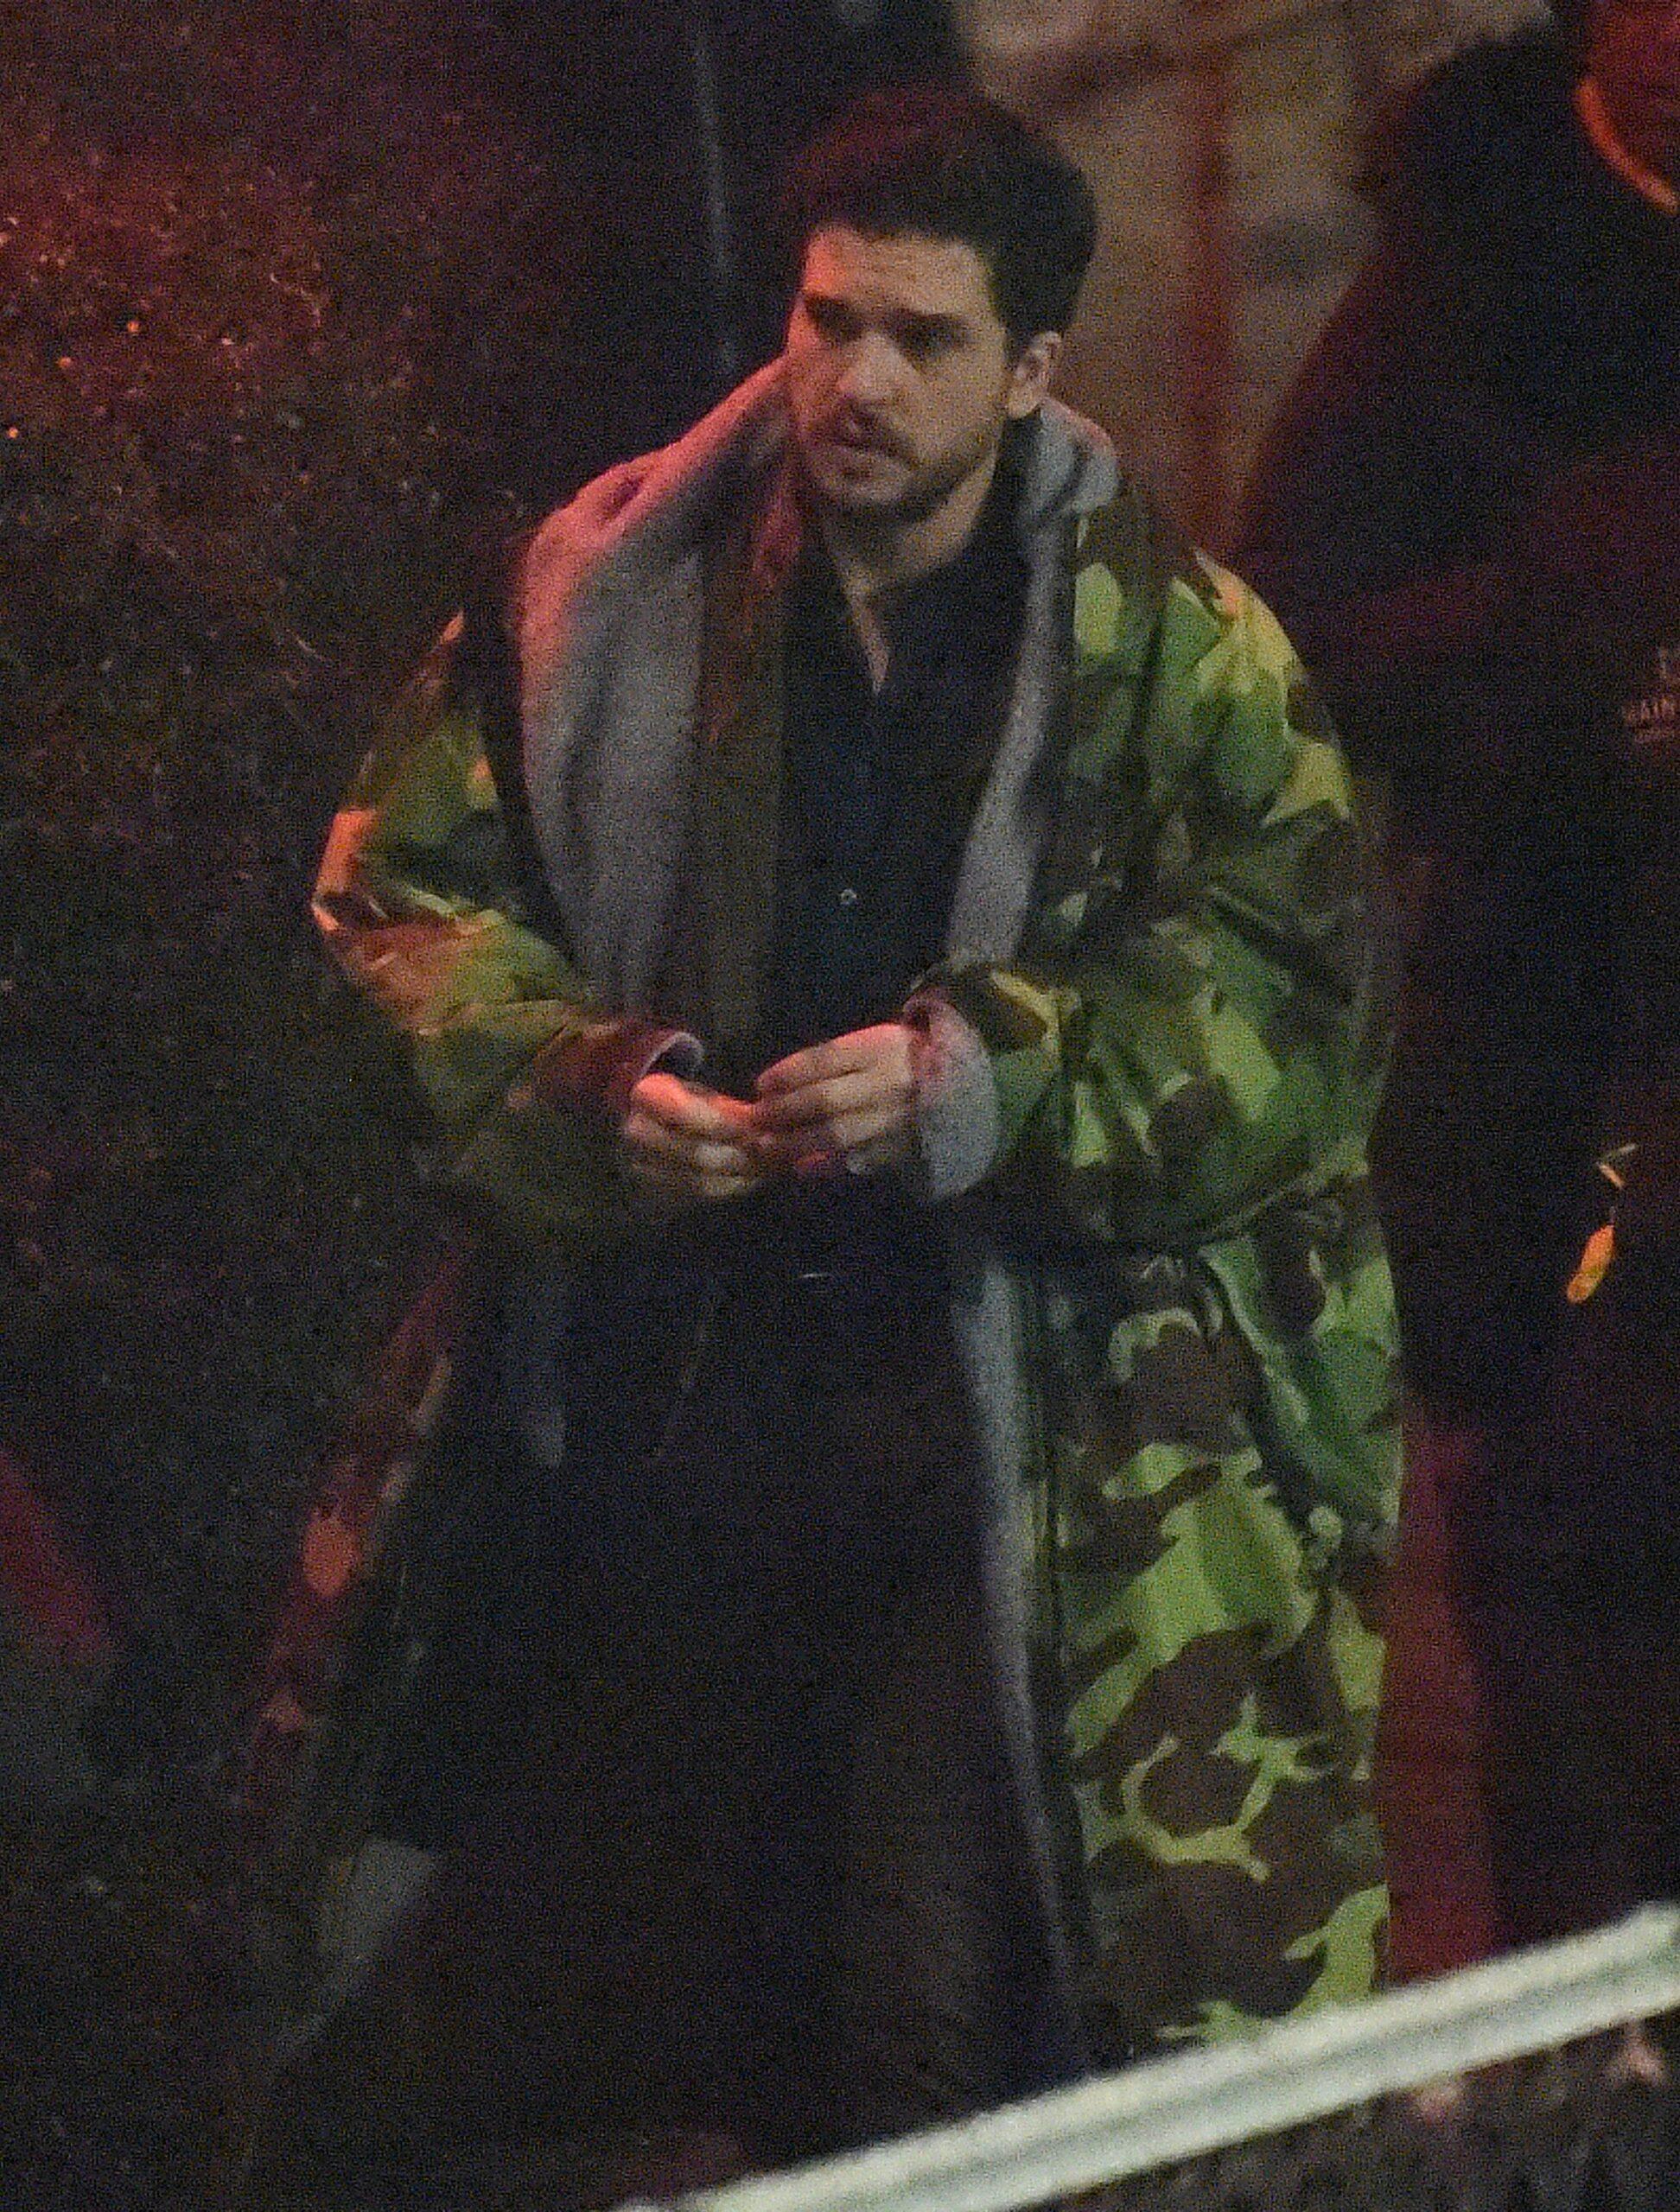 Kit Harington and Richard Madden are seen on set together for the first time during filming night scenes for the latest Marvel film The Eternals Richard was rigged up to a wire and hoisted around 40ft into the air by a crane and suspended over a bridge